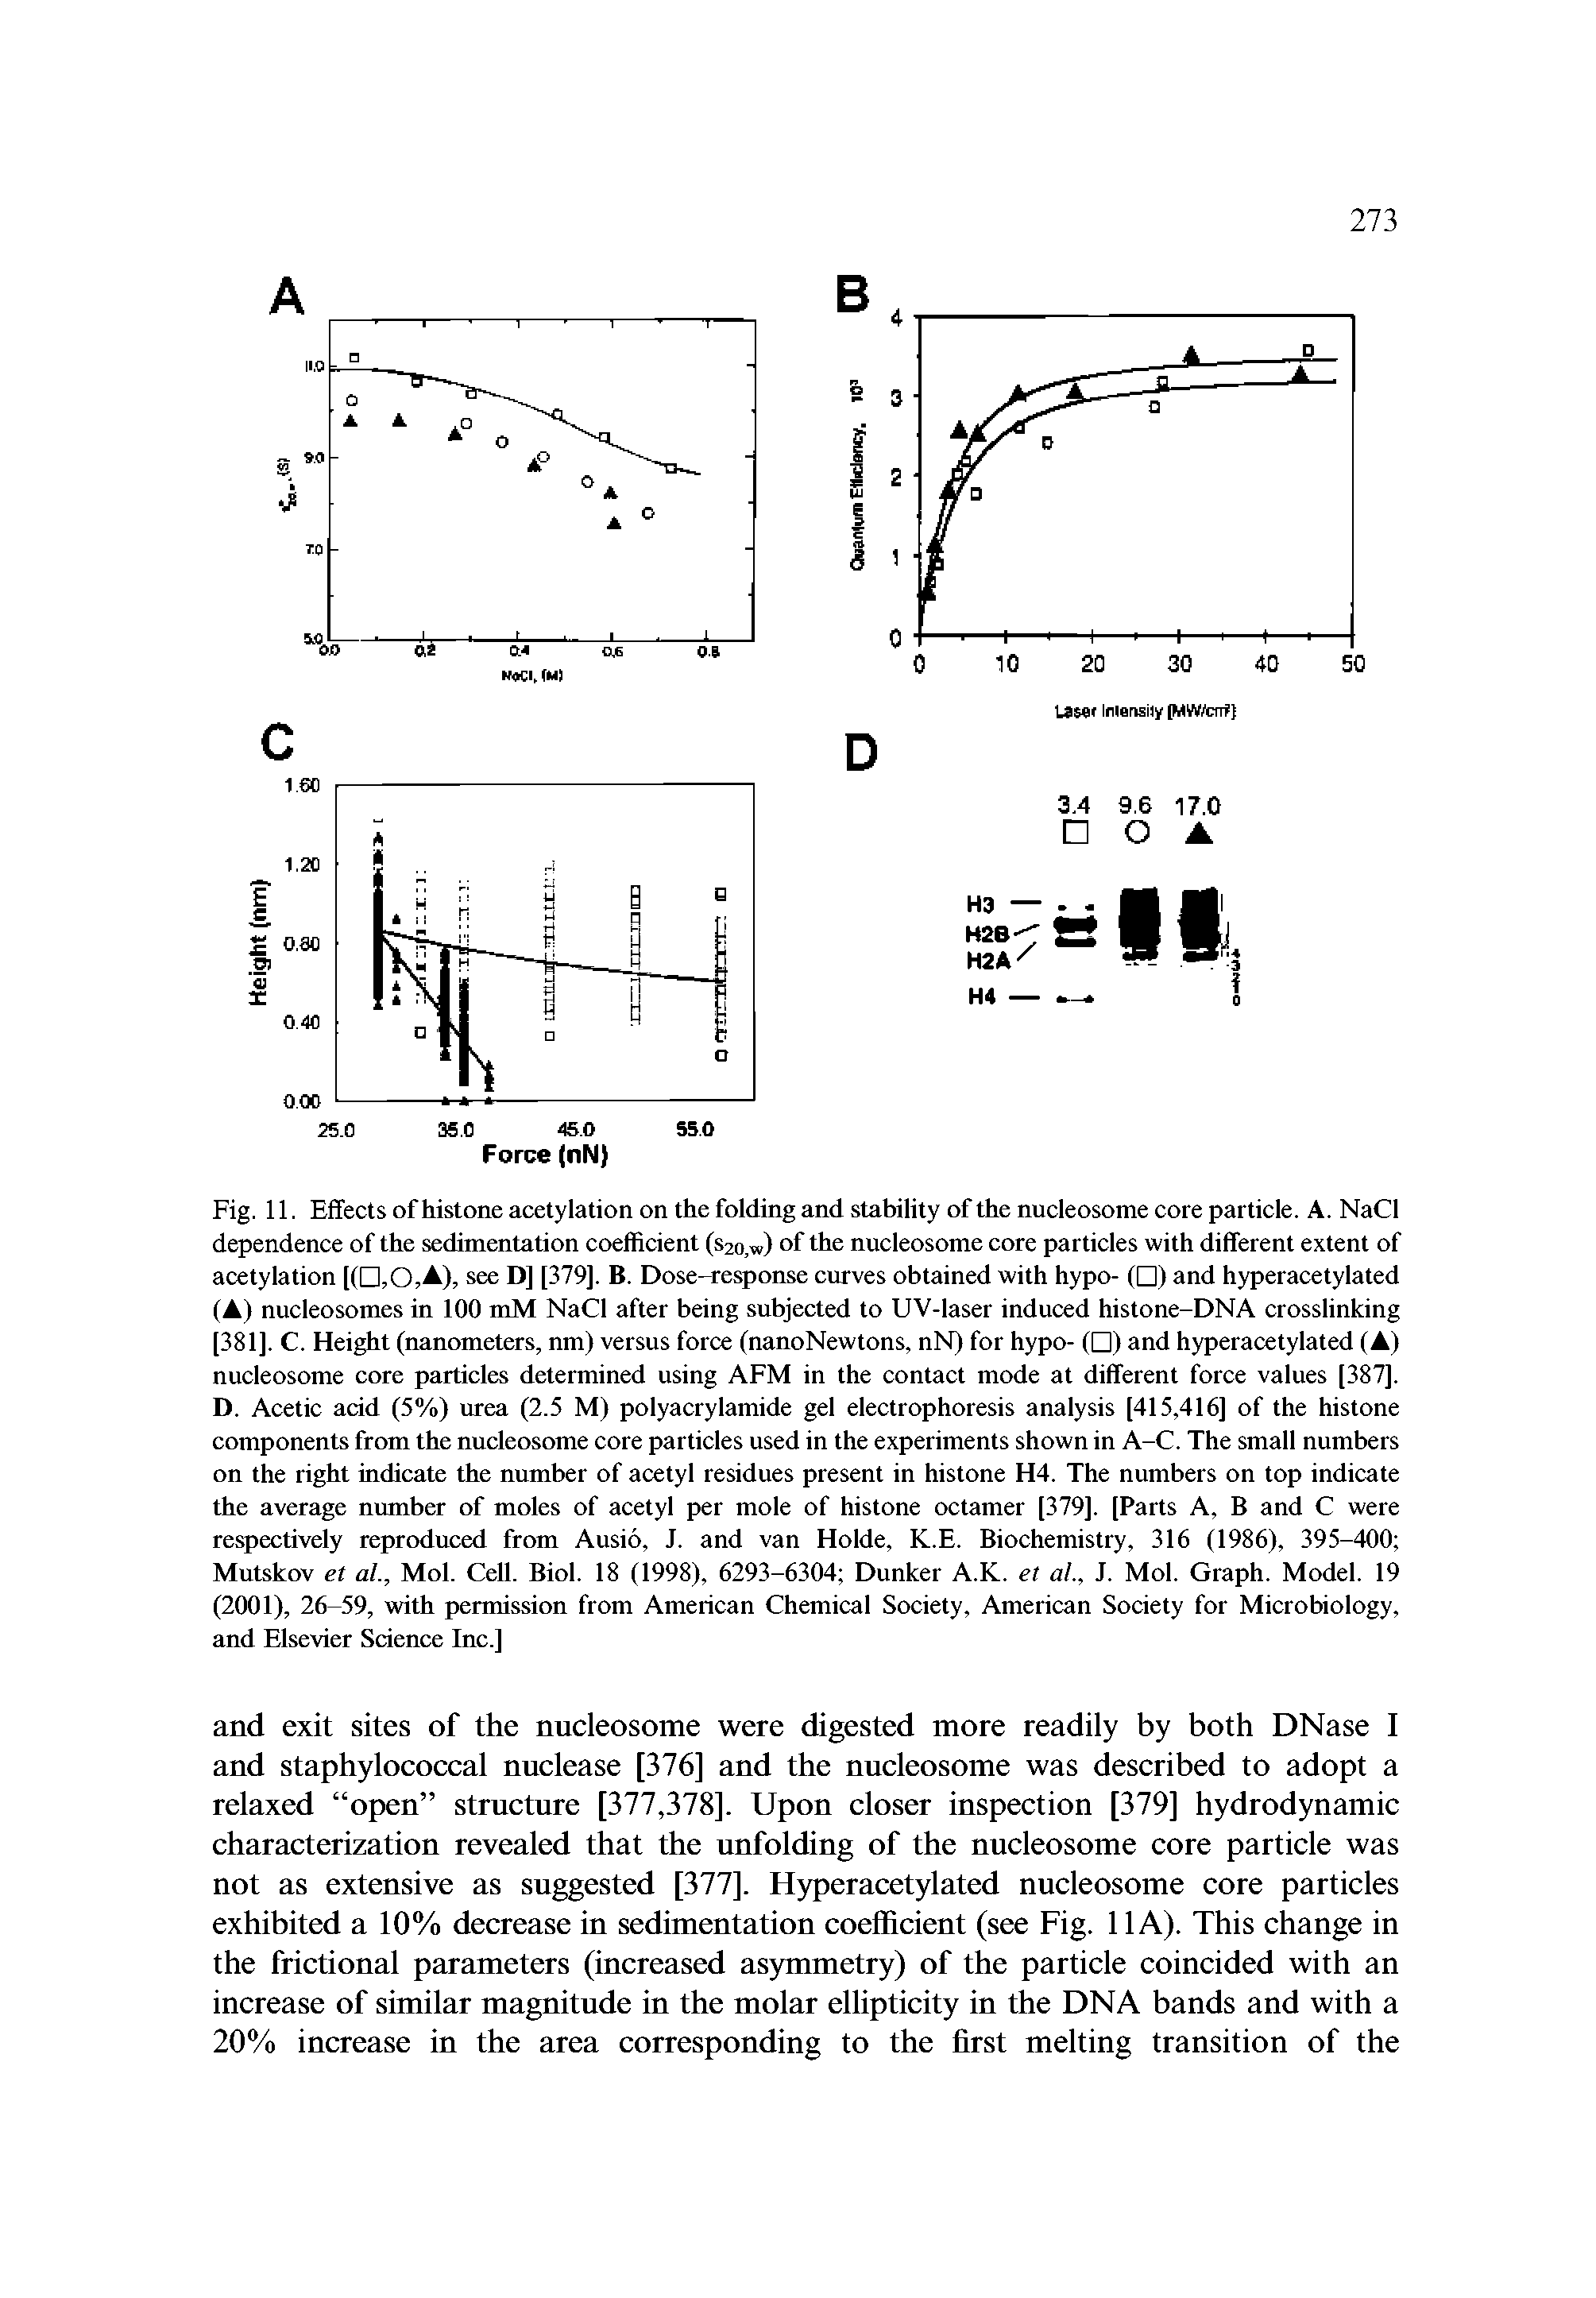 Fig. 11. Effects of histone acetylation on the folding and stability of the nucleosome core particle. A. NaCl dependence of the sedimentation coefficient (s2o,w) of the nucleosome core particles with different extent of acetylation soo D] [379]. B. Dose-response curves obtained with hypo- ( ) and hyperacetylated...